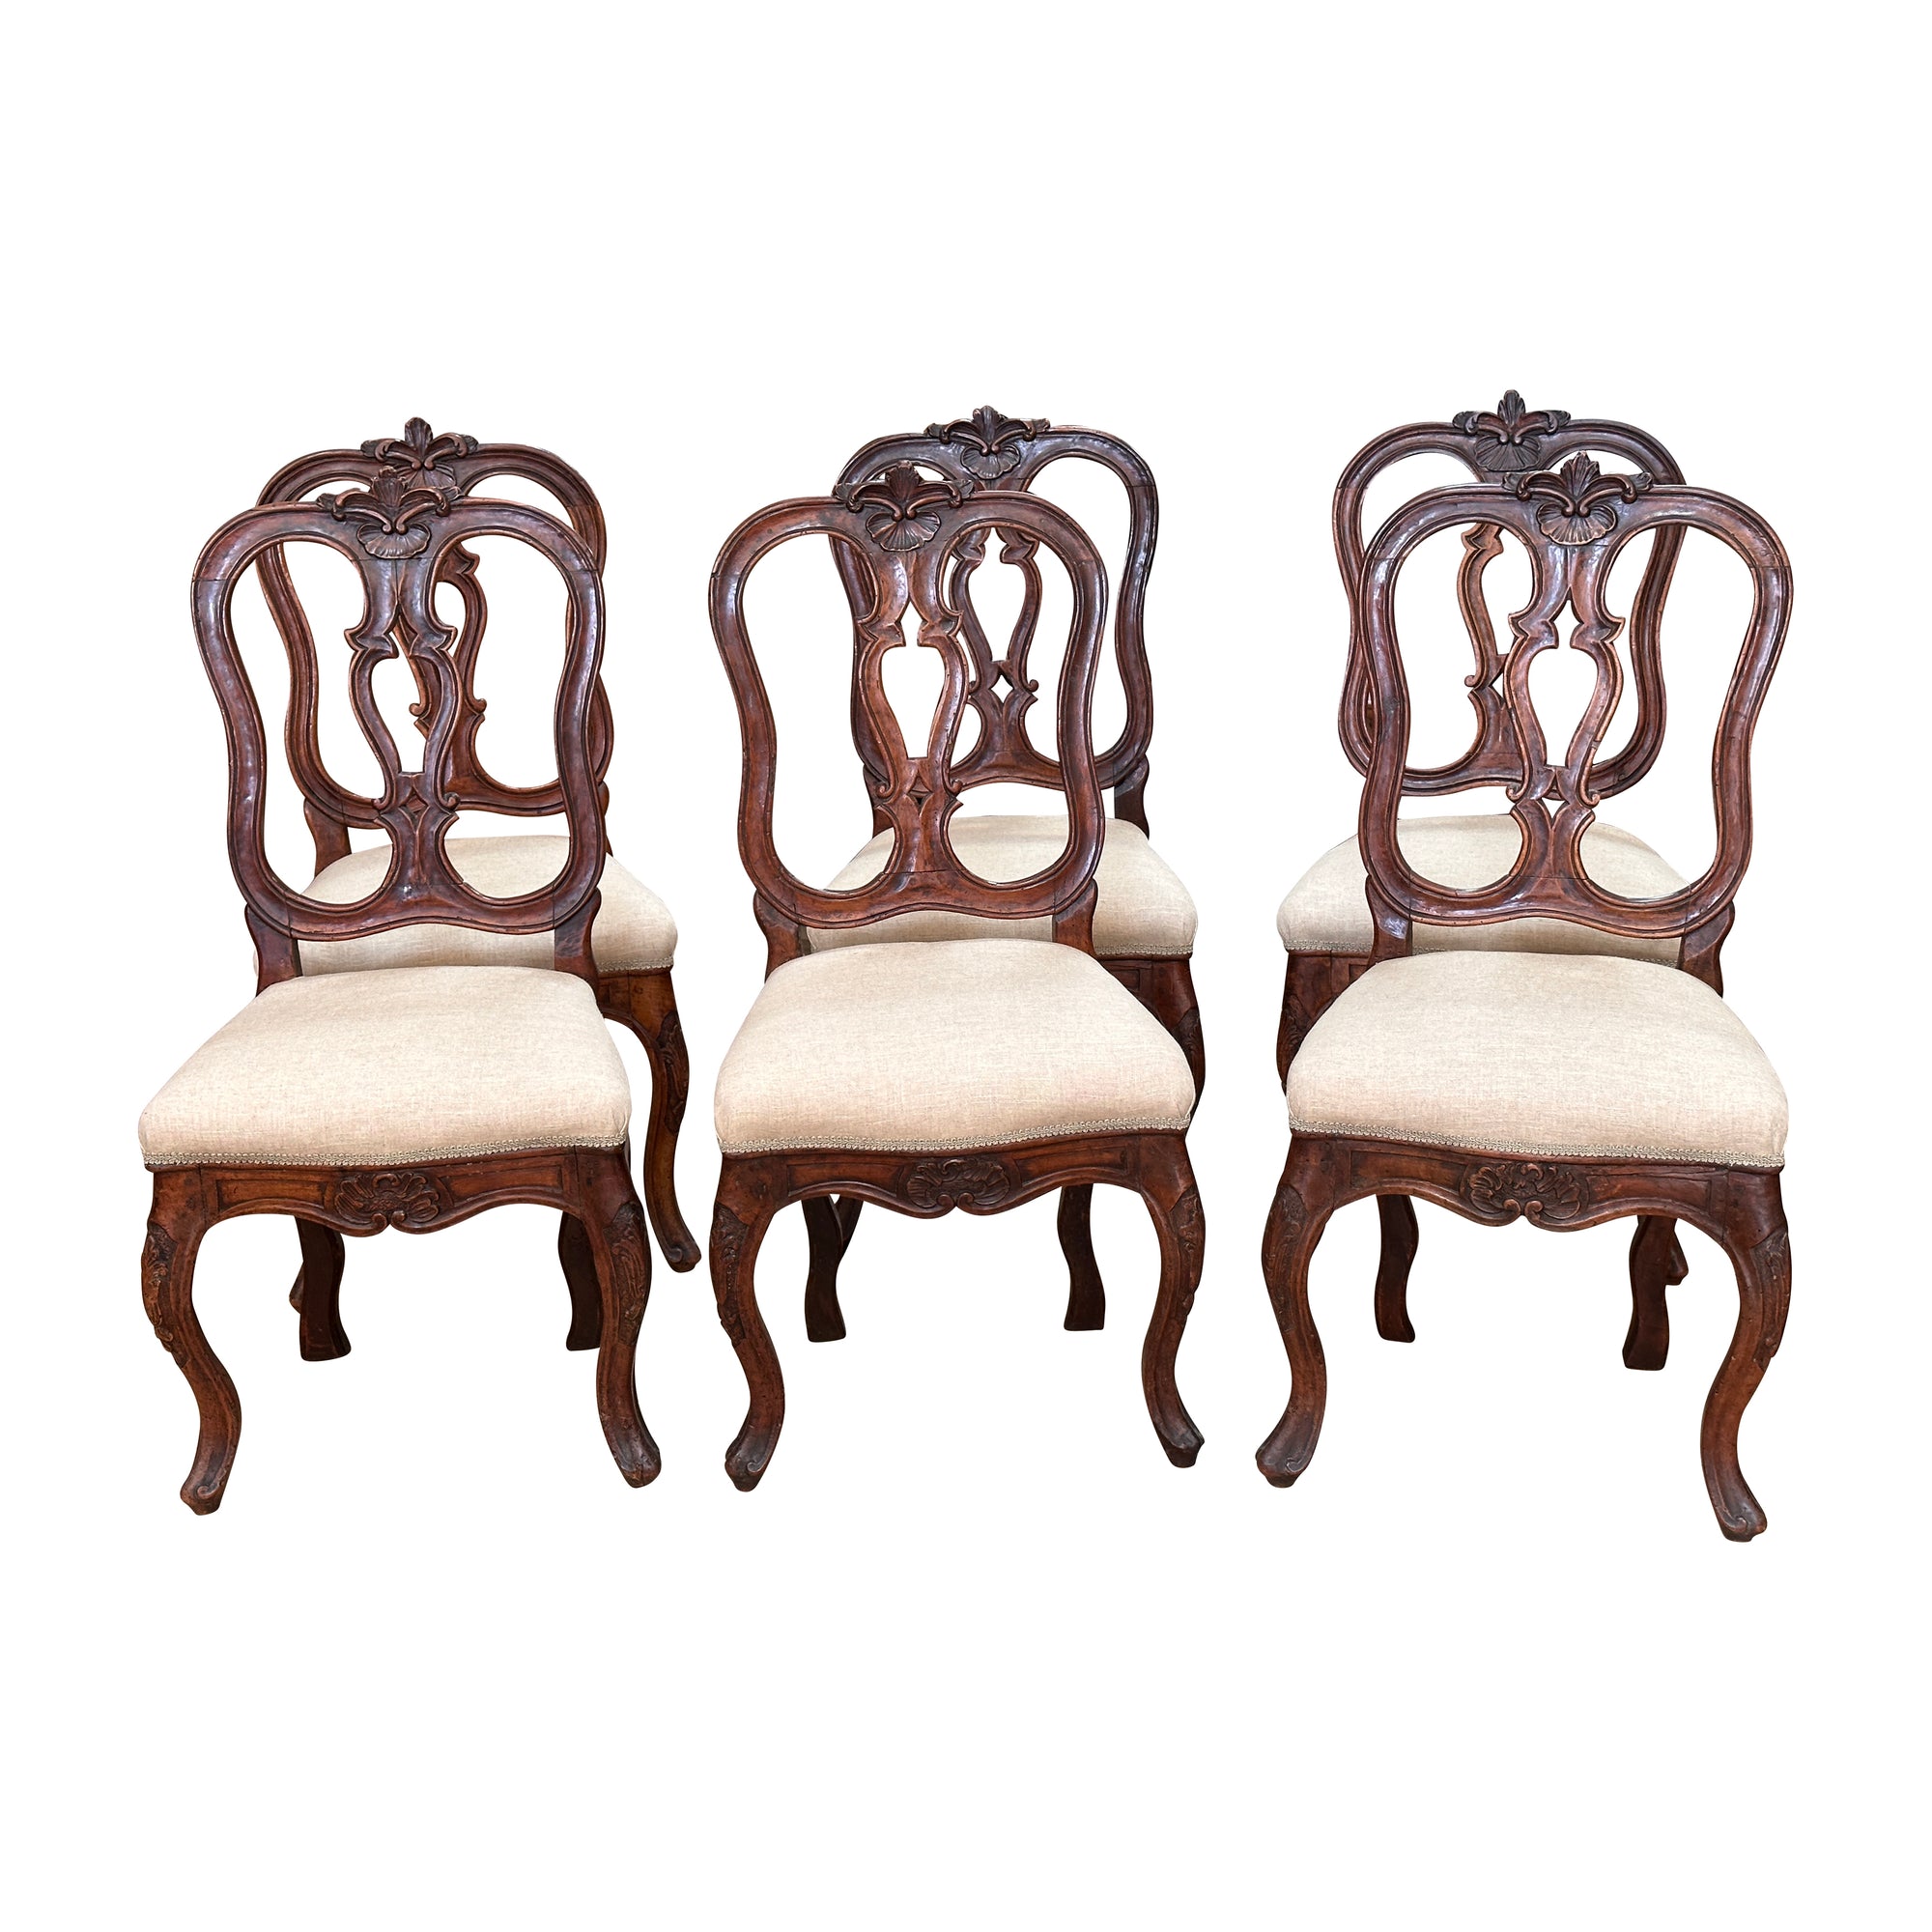 A fine set of Six 18th Century Rococo Italian Dining Chairs